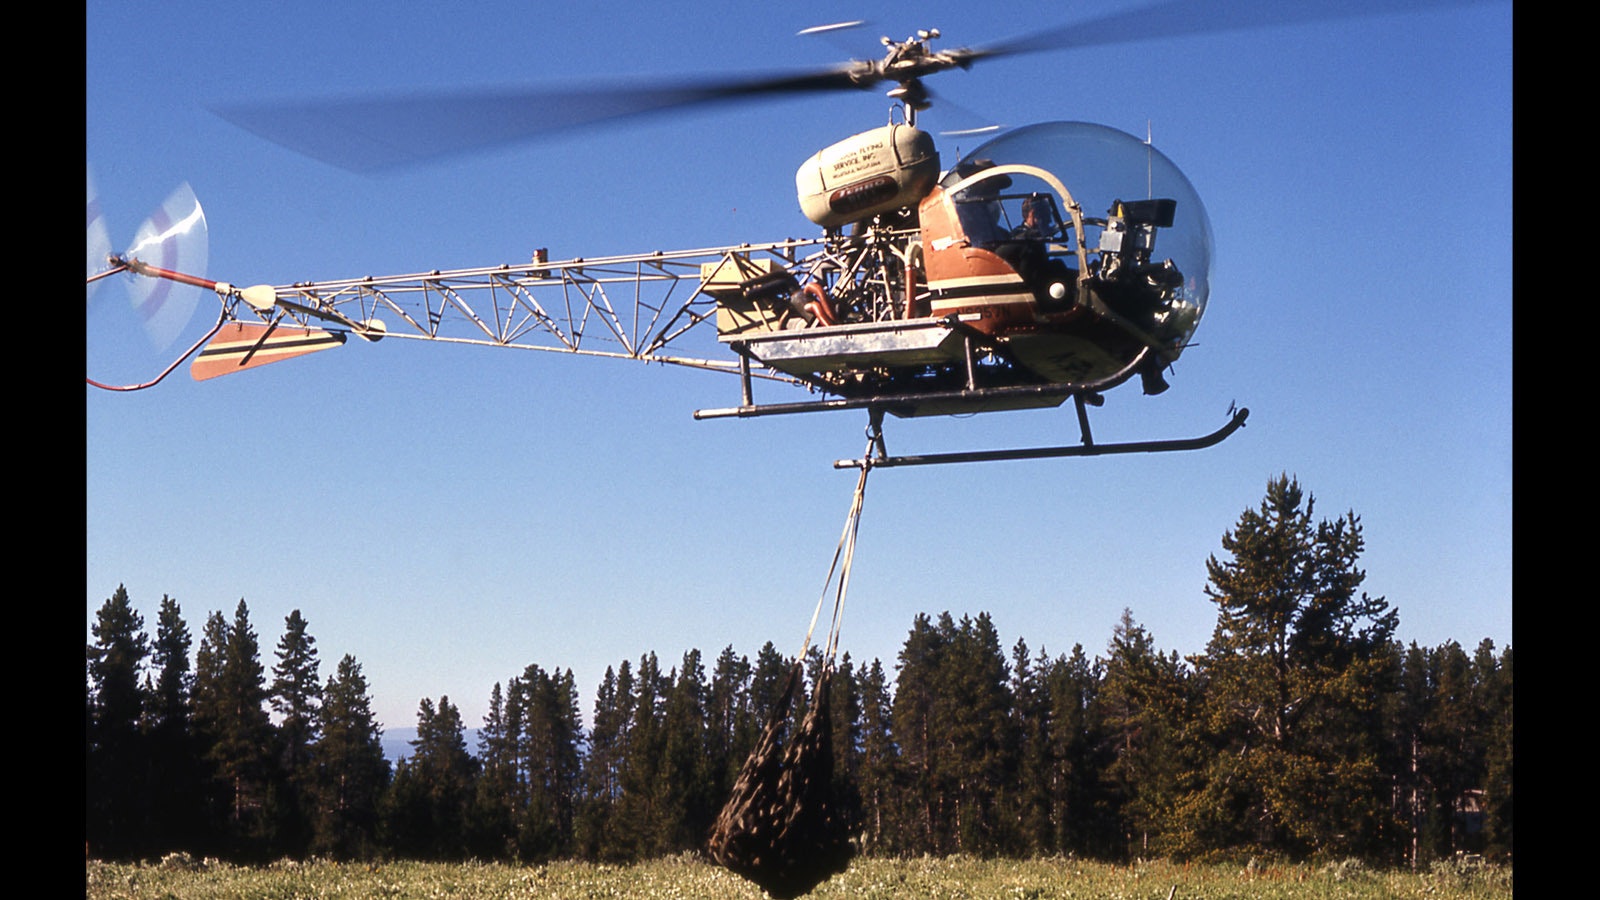 A grizzly bear is transported in a strong net hanging from a helicopter in Yellowstone National Park in 1970.